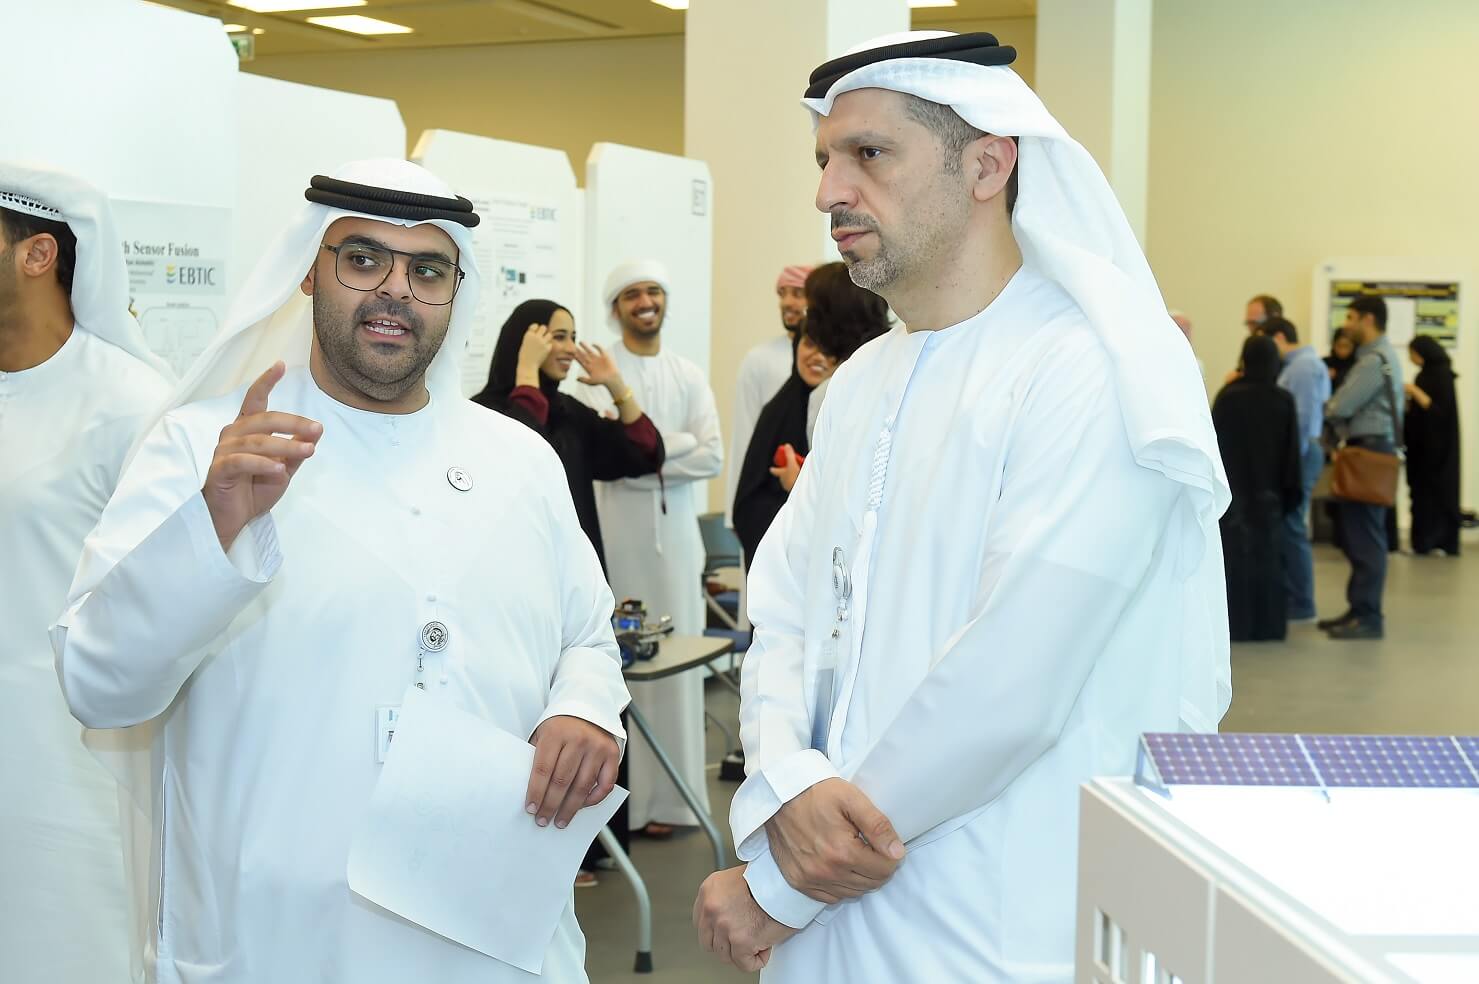 Khalifa University Students Develop Systems to Facilitate Process Improvements at Two Organizations in Abu Dhabi